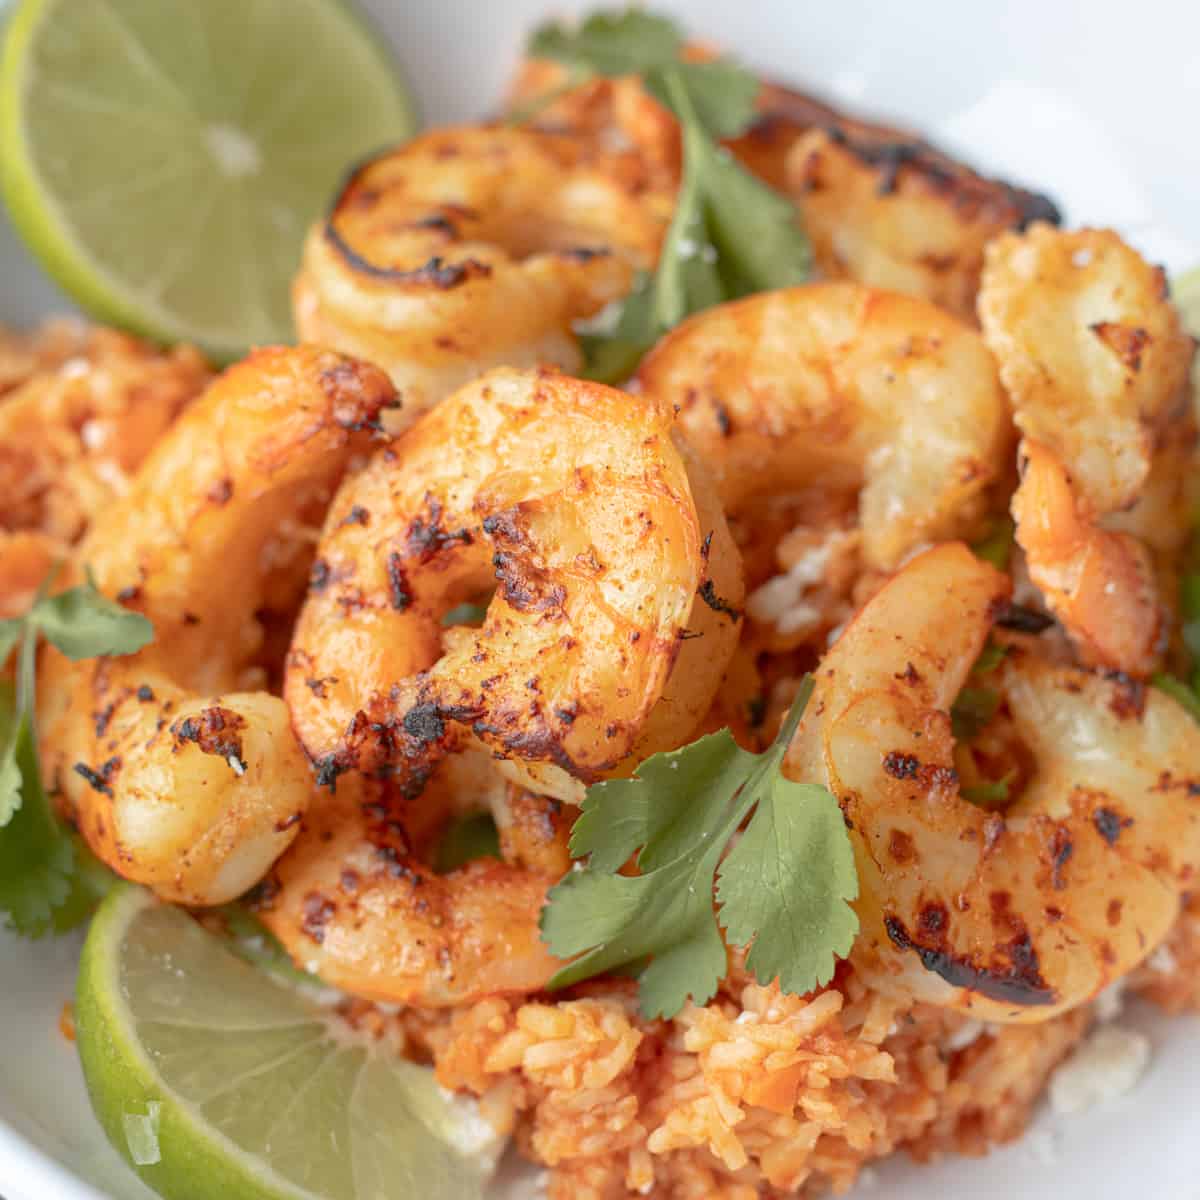 Air fryer tequila lime shrimp over rice with limes on the side.